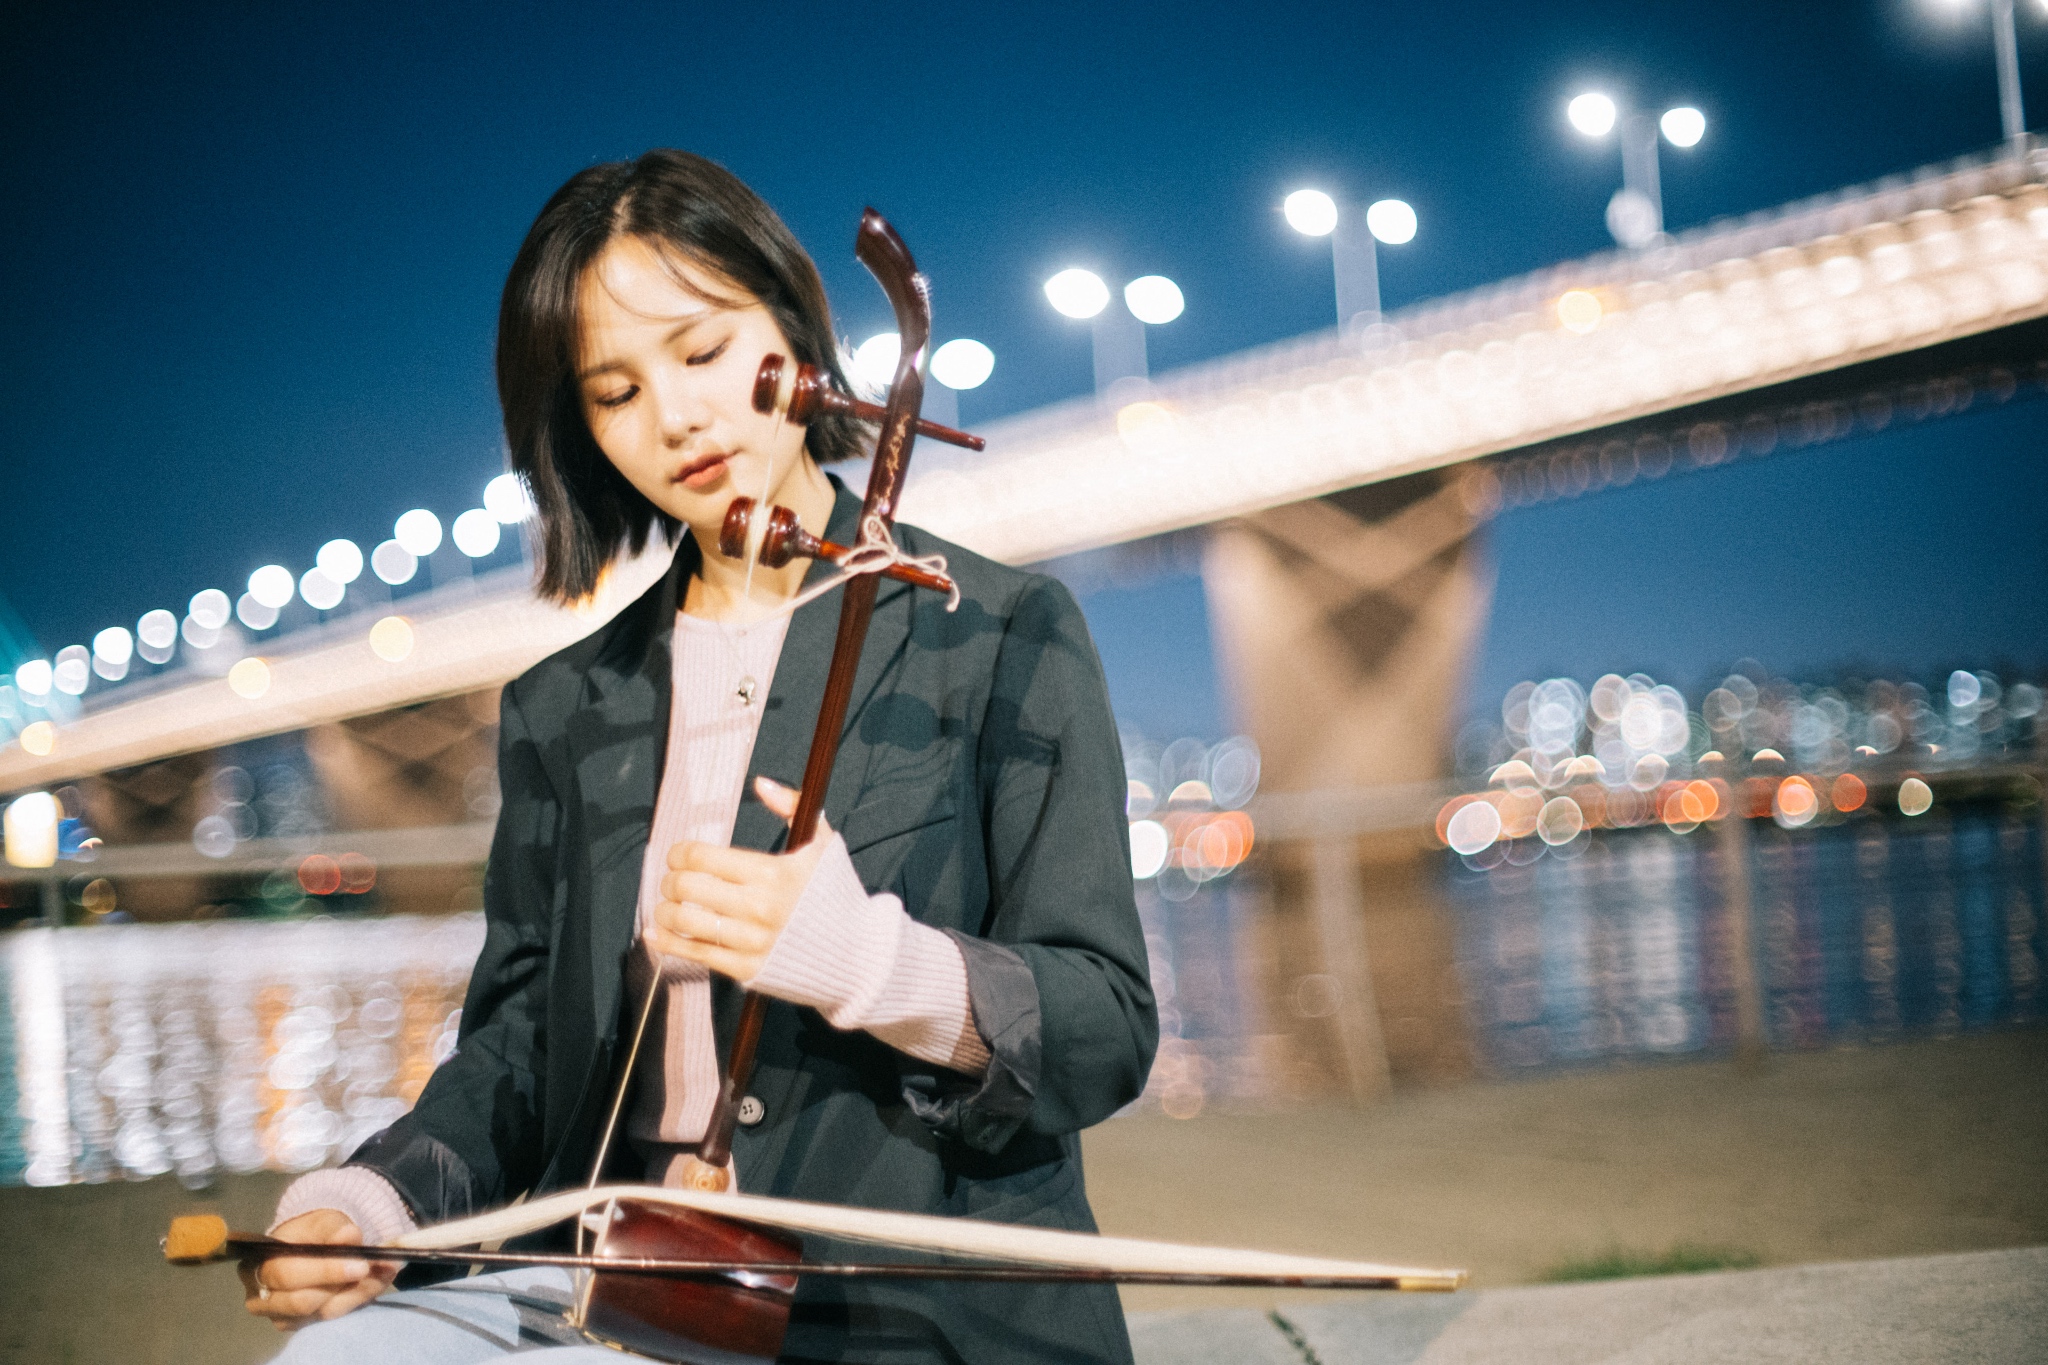 A young woman plays a stringed instrument. A car bridge and illuminated city in the background.